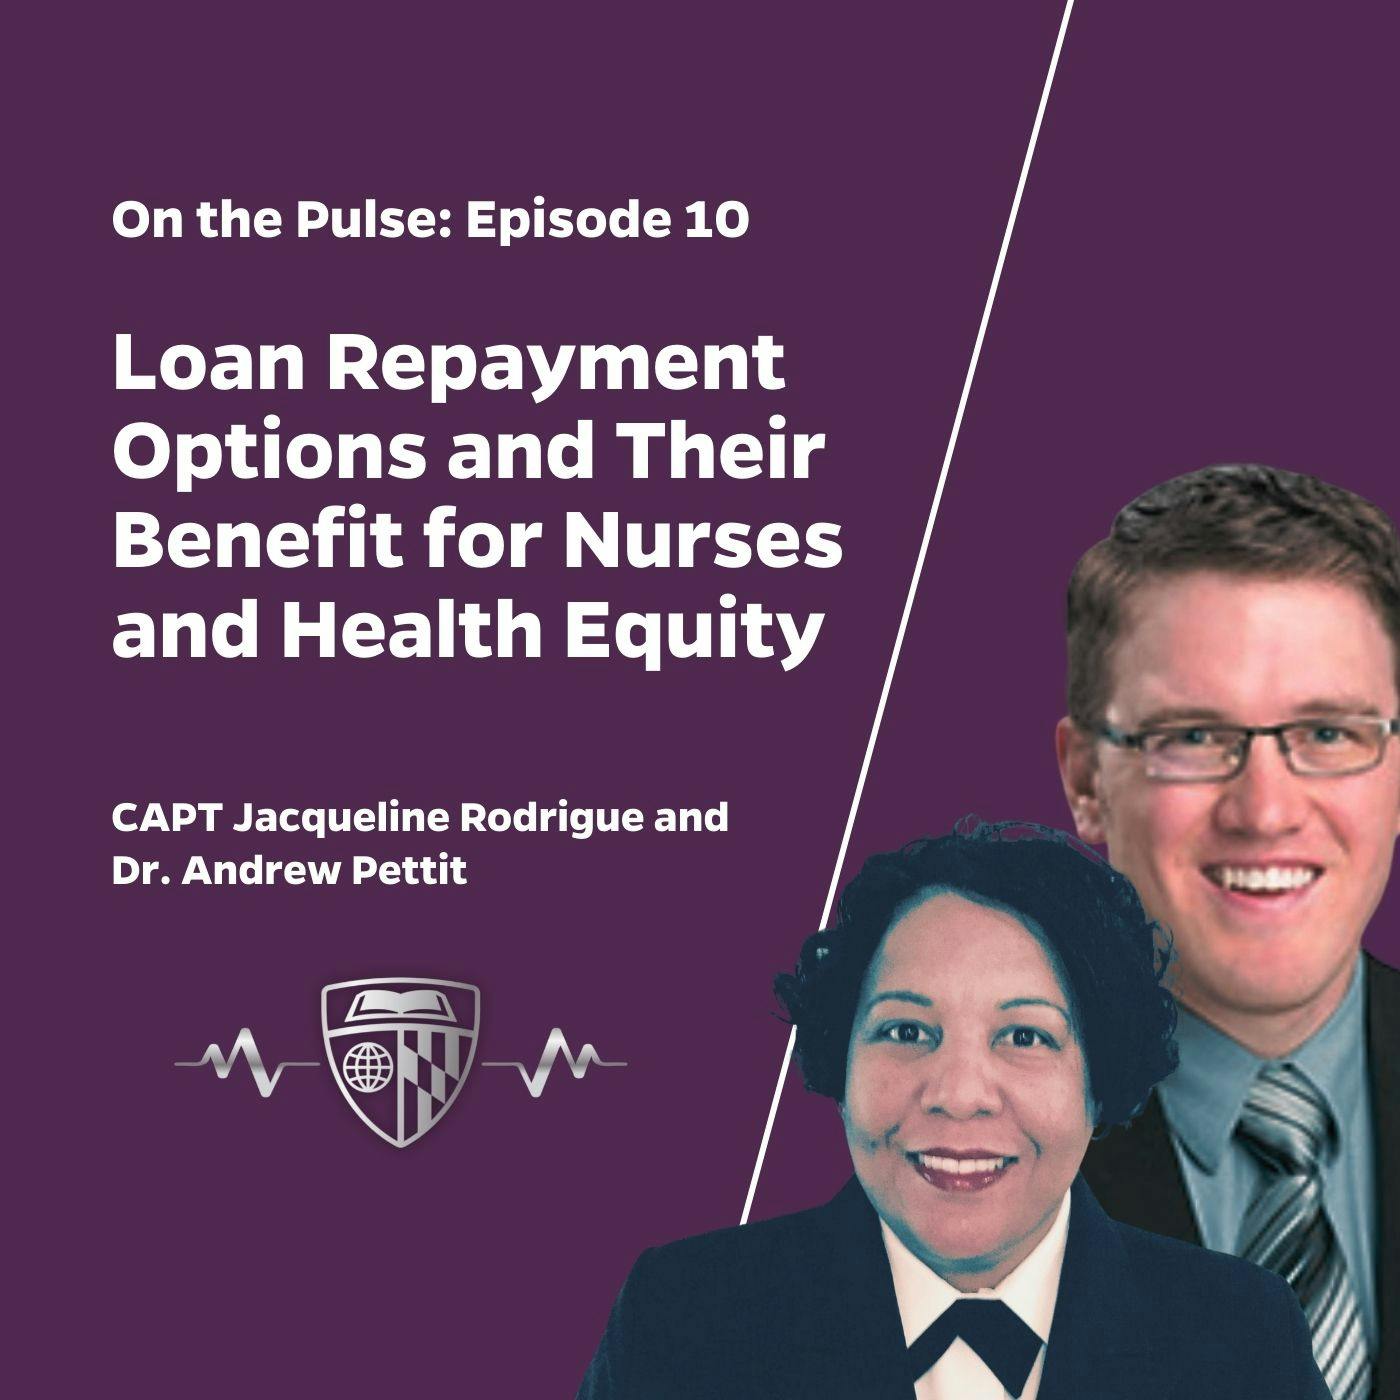 Episode 10: Loan Repayment Options and Their Benefit for Nurses and Health Equity